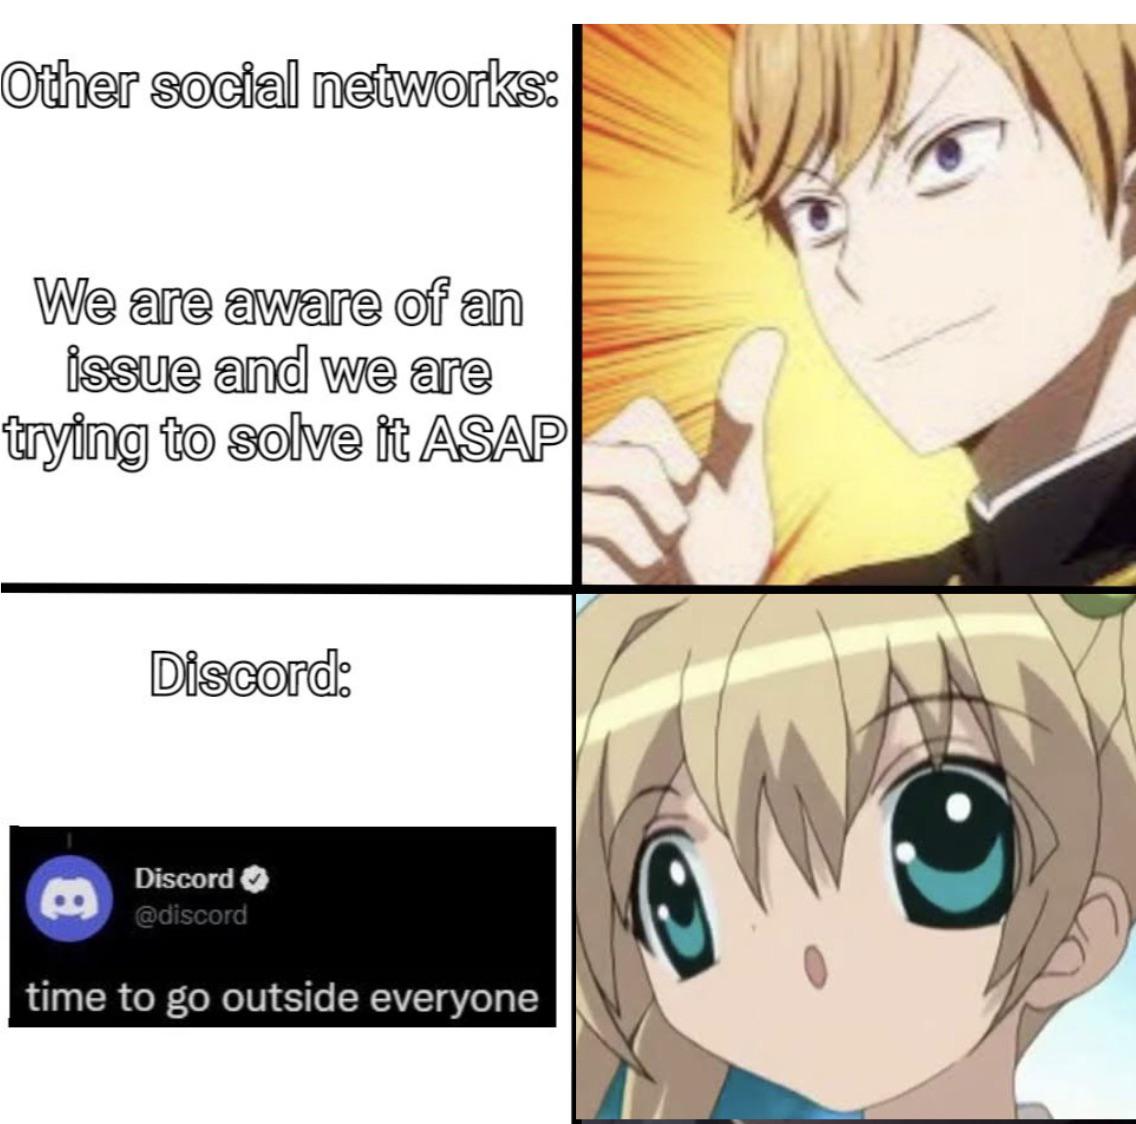 monday morning randomness - derpy anime memes - Other social networks We are aware of an issue and we are trying to solve it Asap Discord Discord time to go outside everyone